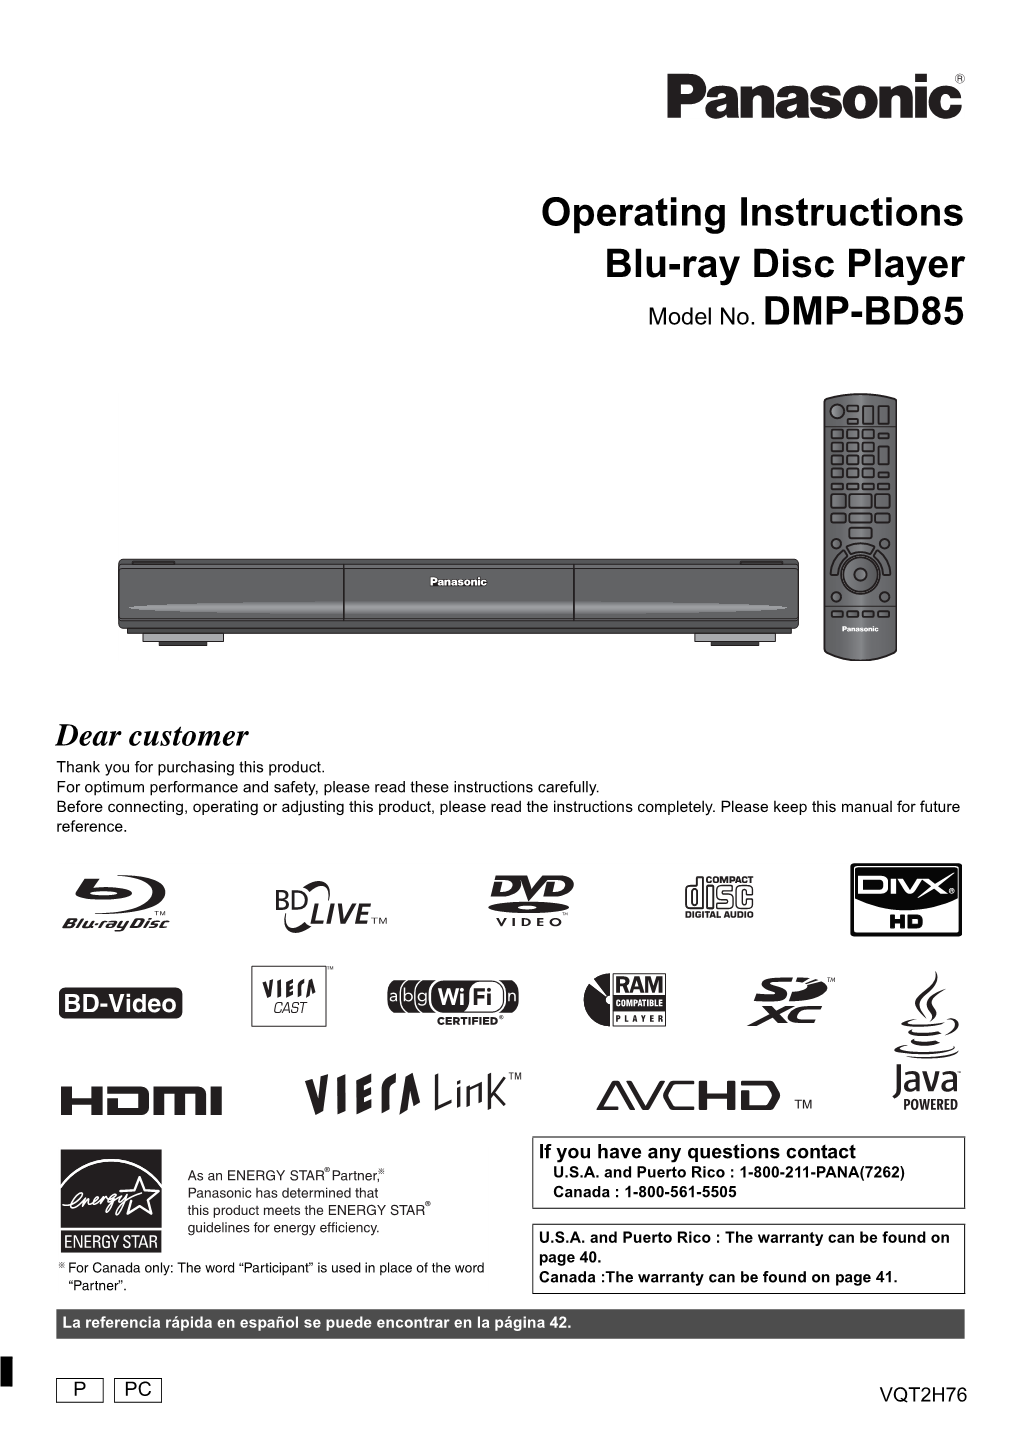 Operating Instructions Blu-Ray Disc Player Model No